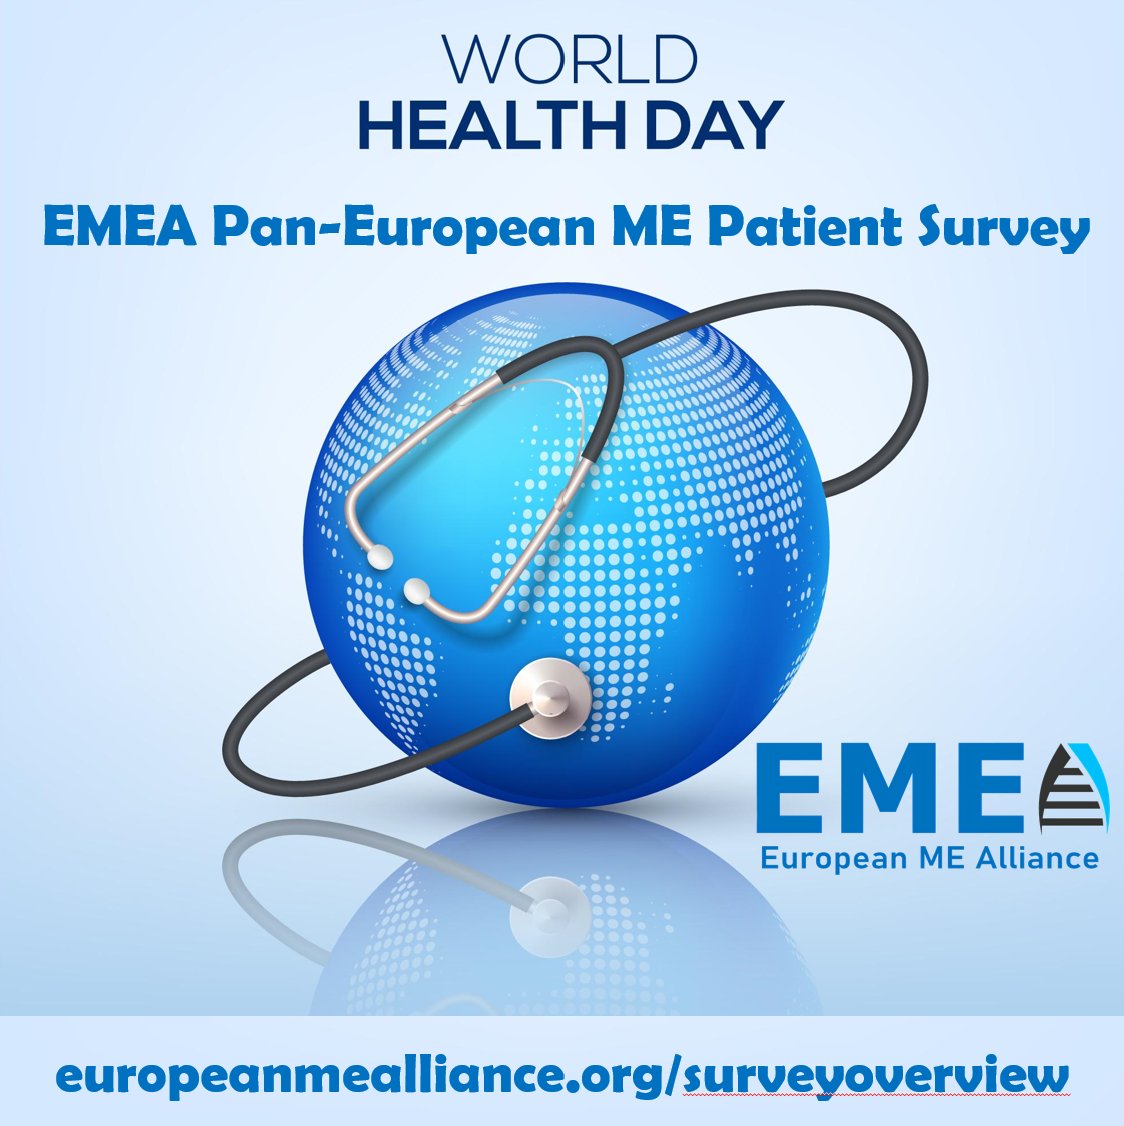 The European ME Alliance (@EUROMEALL) has released a survey report that underscores the urgent need for recognition of #MECFS as a serious physical illness. Early diagnosis & disease management are critical: europeanmealliance.org/emea-pan-europ… #MyalgicEncephalomyelitis #ME